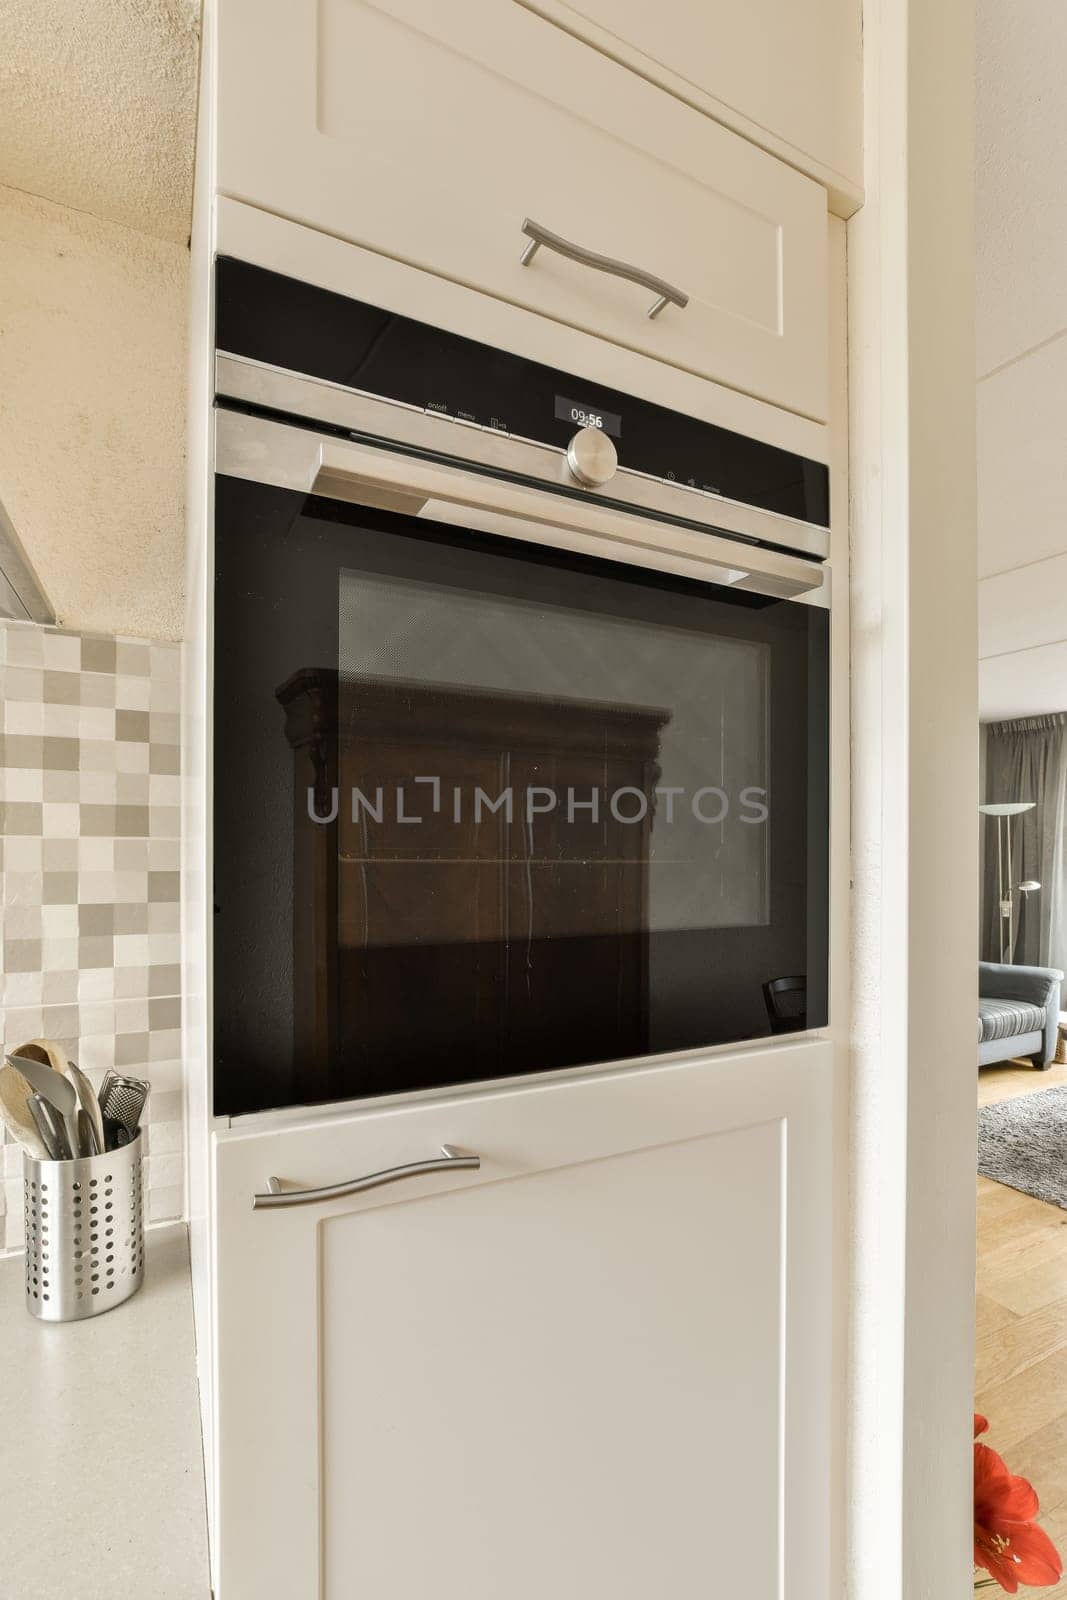 a built in oven in a kitchen door by casamedia